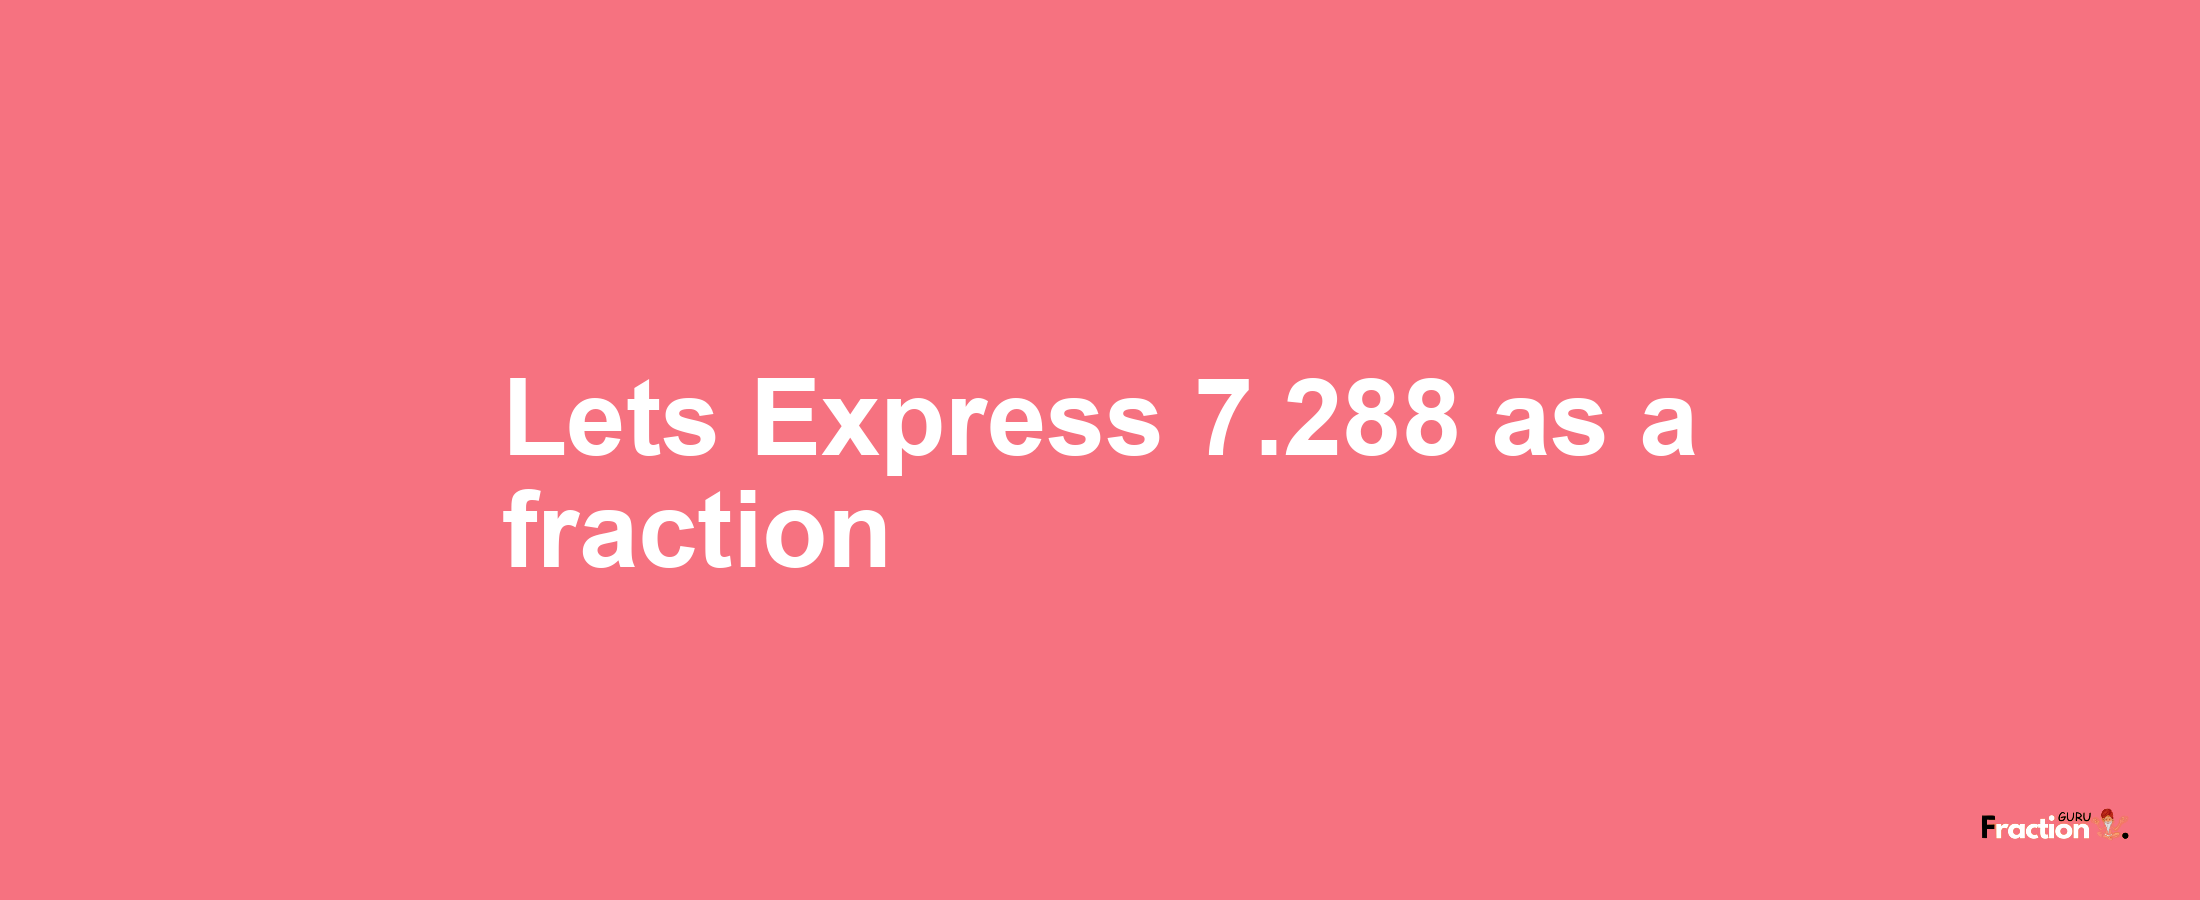 Lets Express 7.288 as afraction